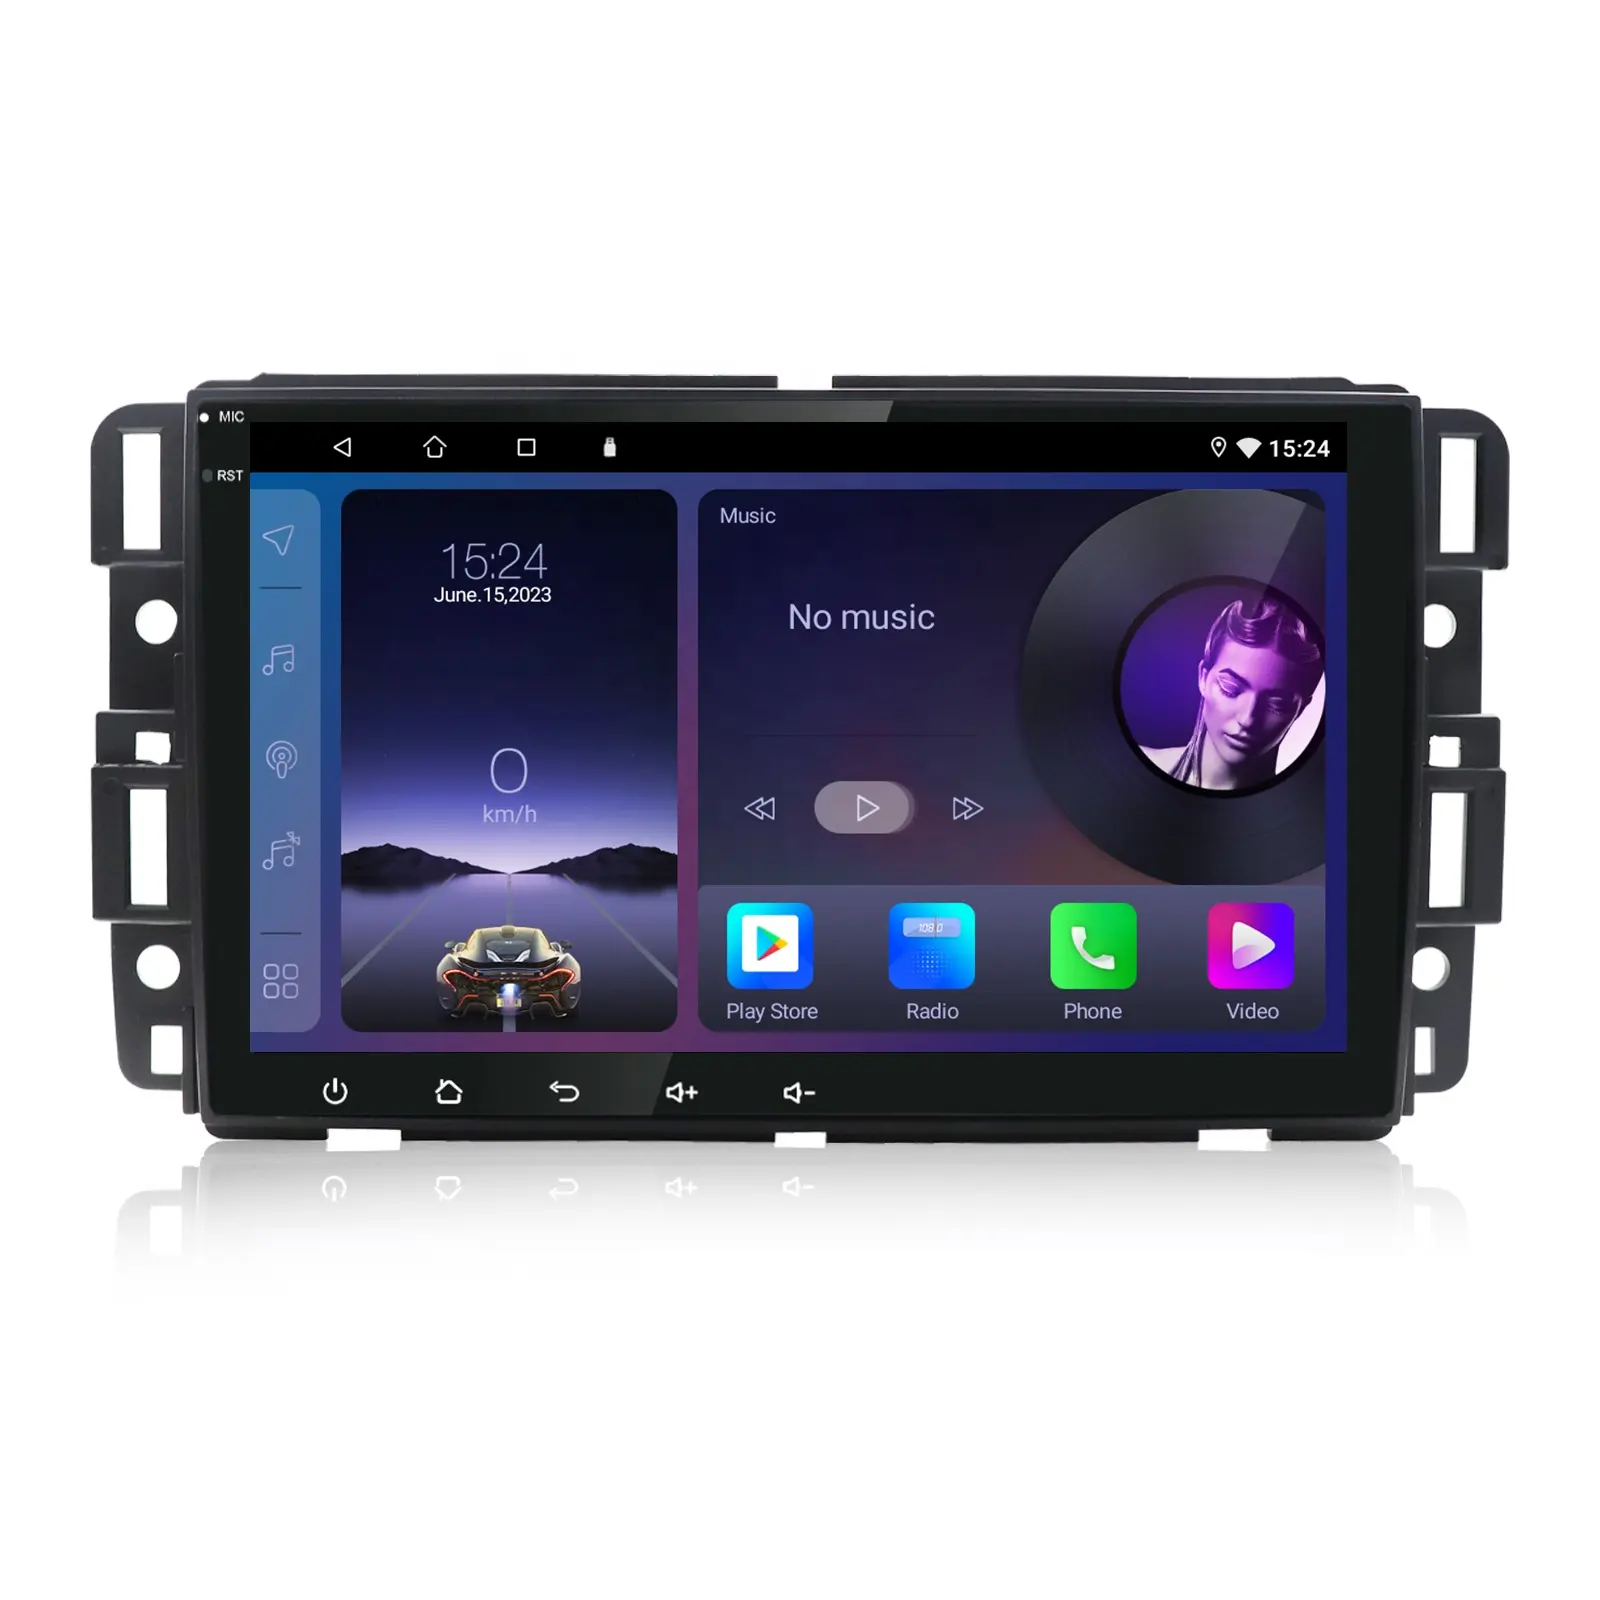 JYT Android Screen Resolution 1280*720 Car Dvd Player For GMC Chevrolet Buick Carplay DSP Double Din Car Radio Navigation